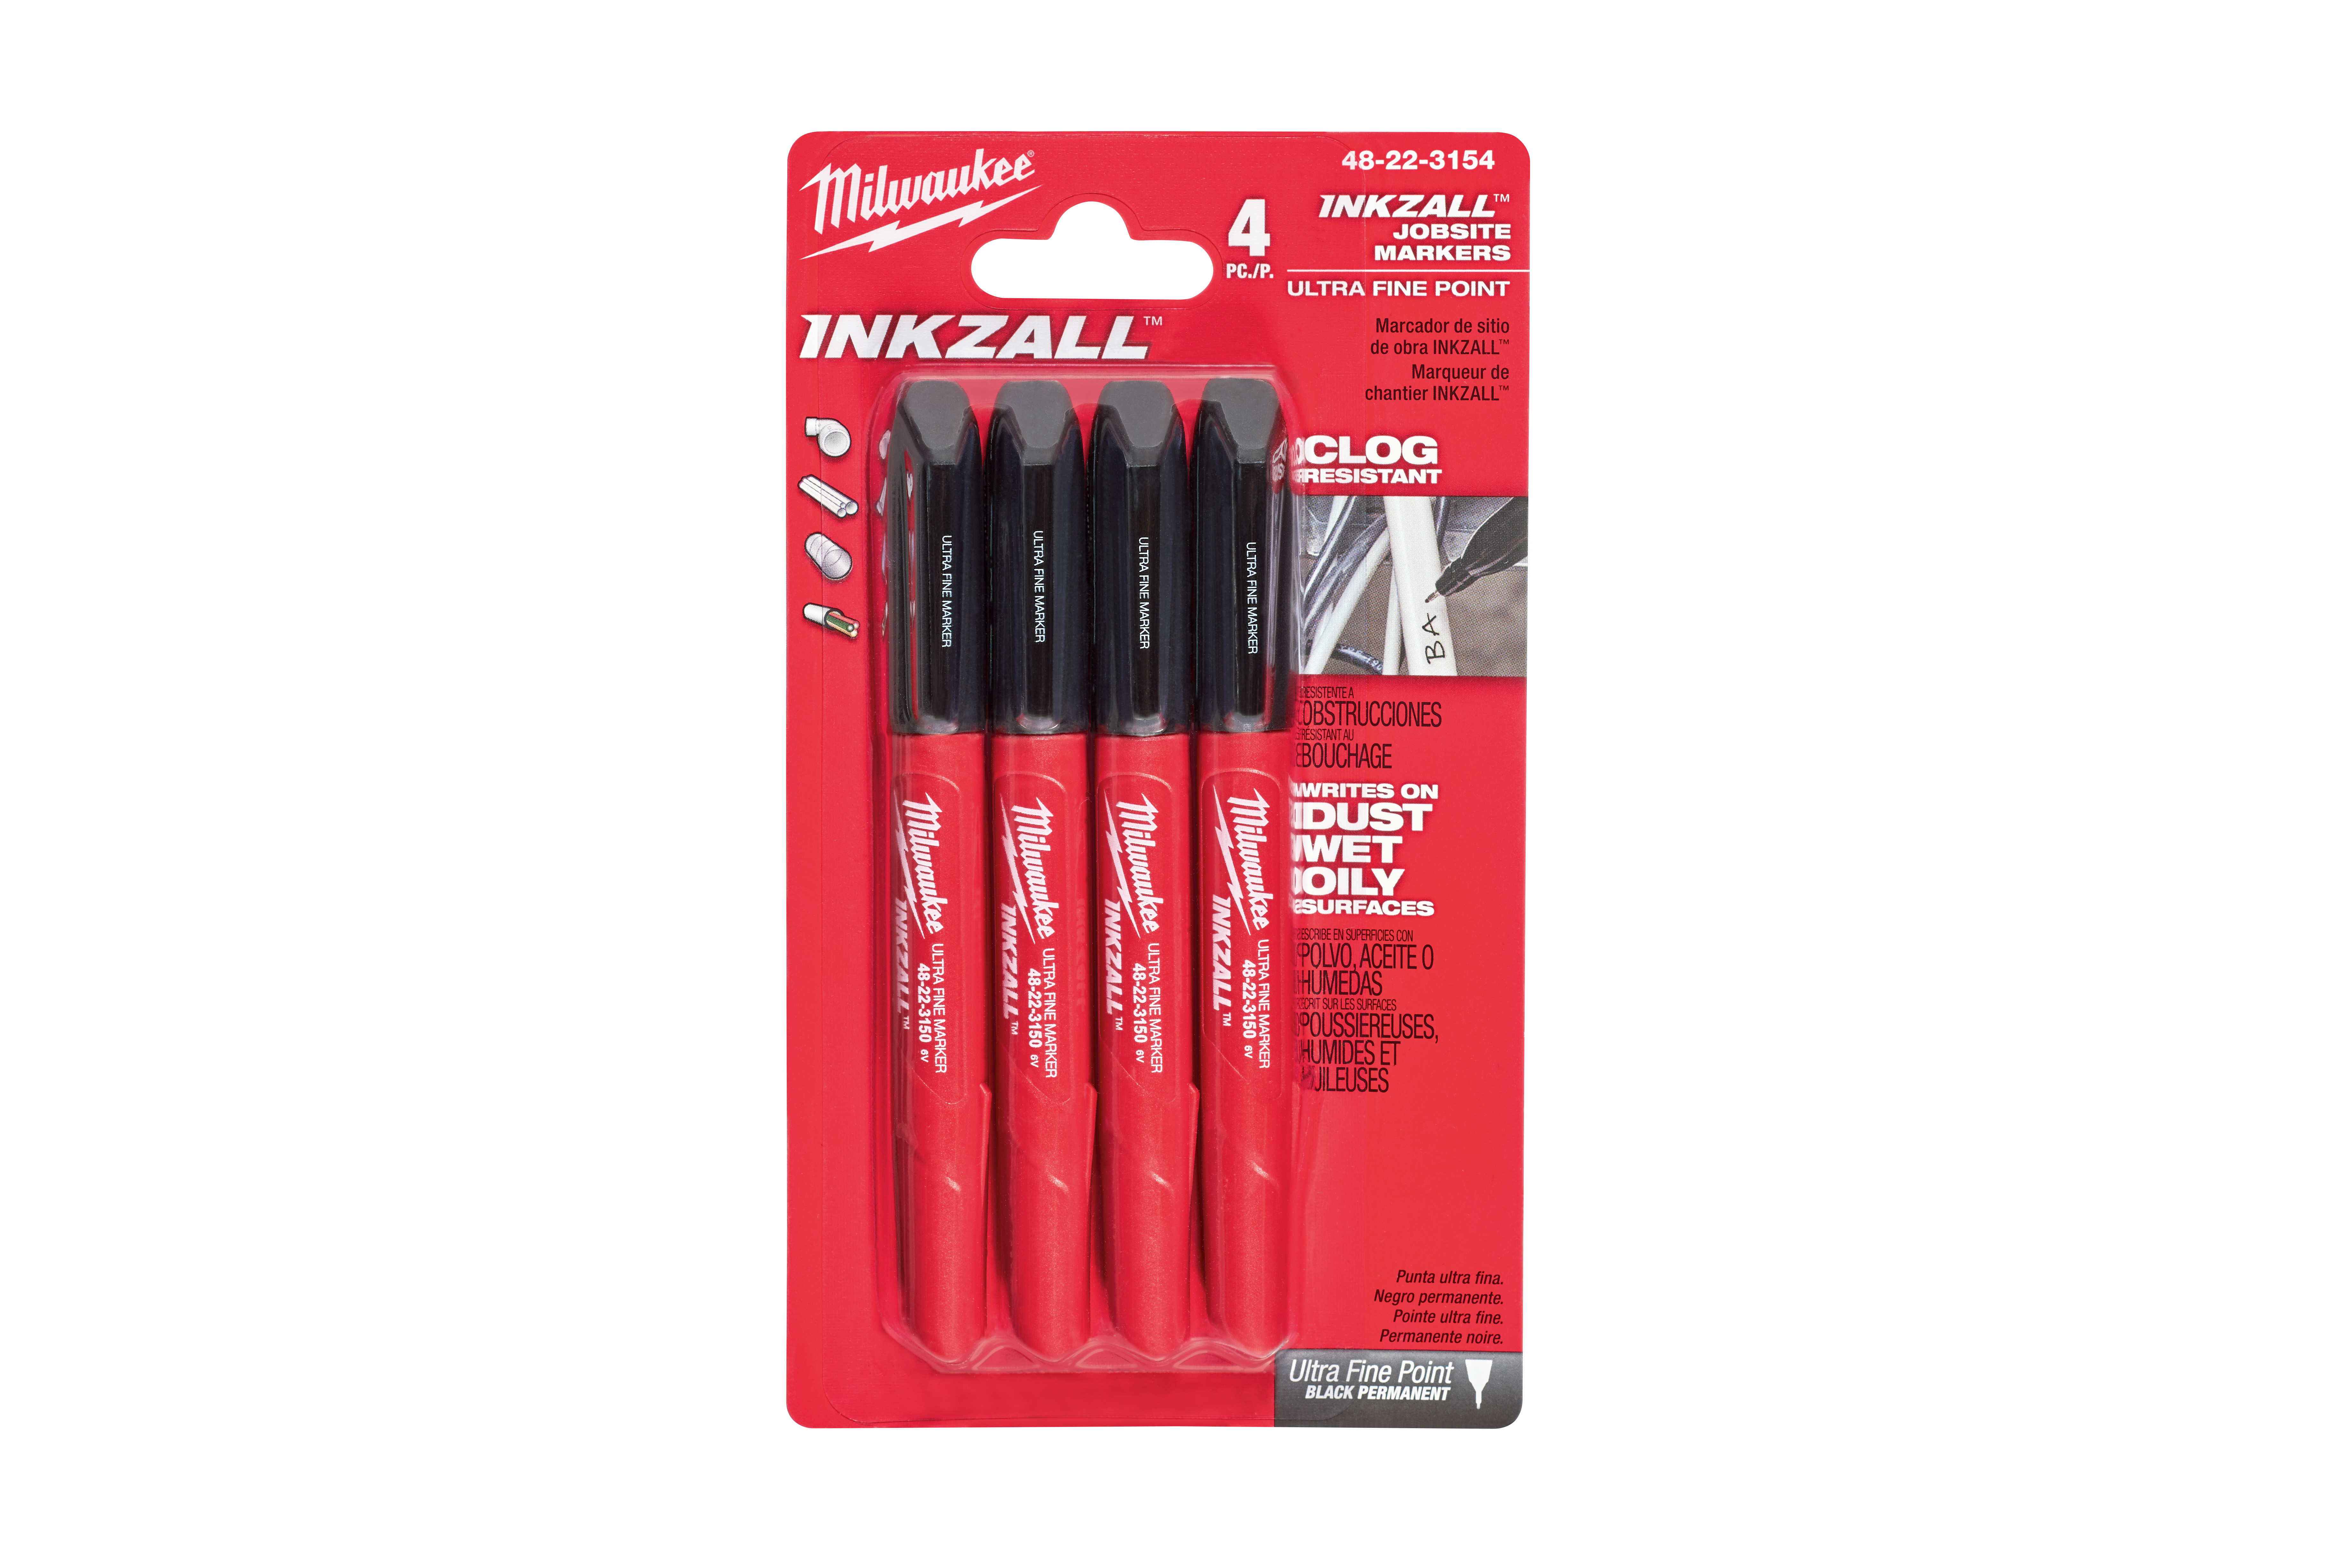 Milwaukee® INKZALL™ Ultra Fine Point Markers are optimized for jobsite conditions. The durable tip is designed to withstand writing on rough surfaces and writes through dusty, wet, or oily contamination. The hard hat clip is designed to clip onto the brim of hard hats for easy access. The Ultra Fine Point delivers 0.5mm markings for precise writing. Bullets: Clog resistant tip Quick dry time Anti-roll design Pocket clip Lanyard clip Long cap off life. 79764